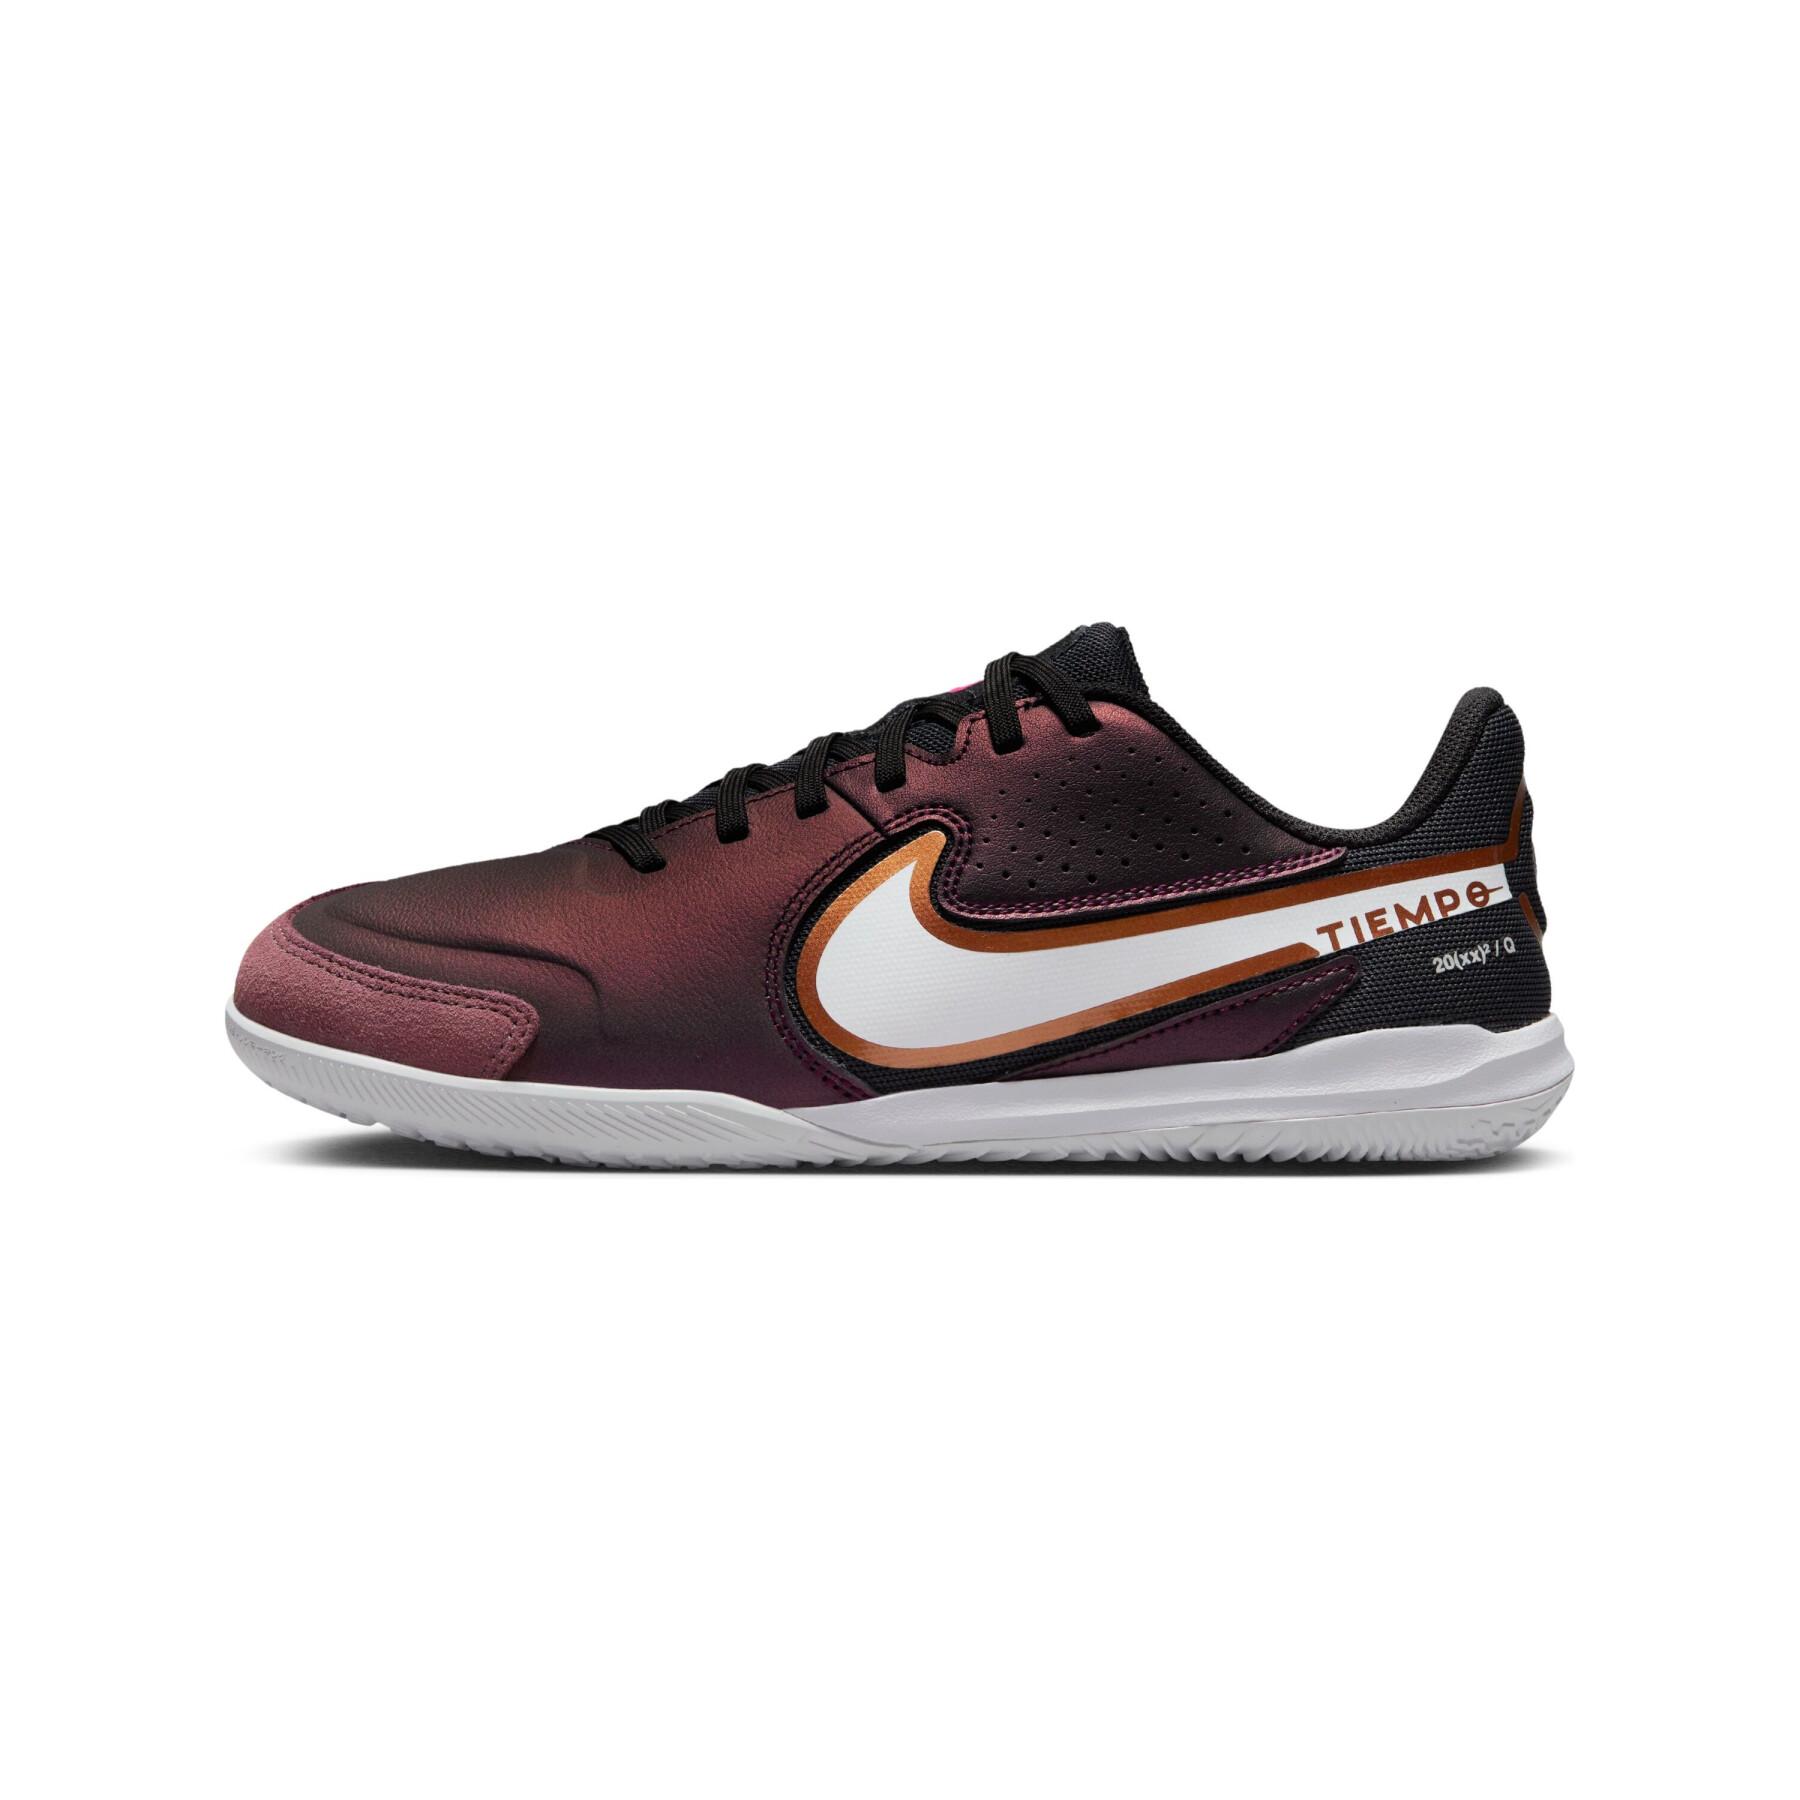 Children's soccer shoes Nike Tiempo Legend 9 Academy IC